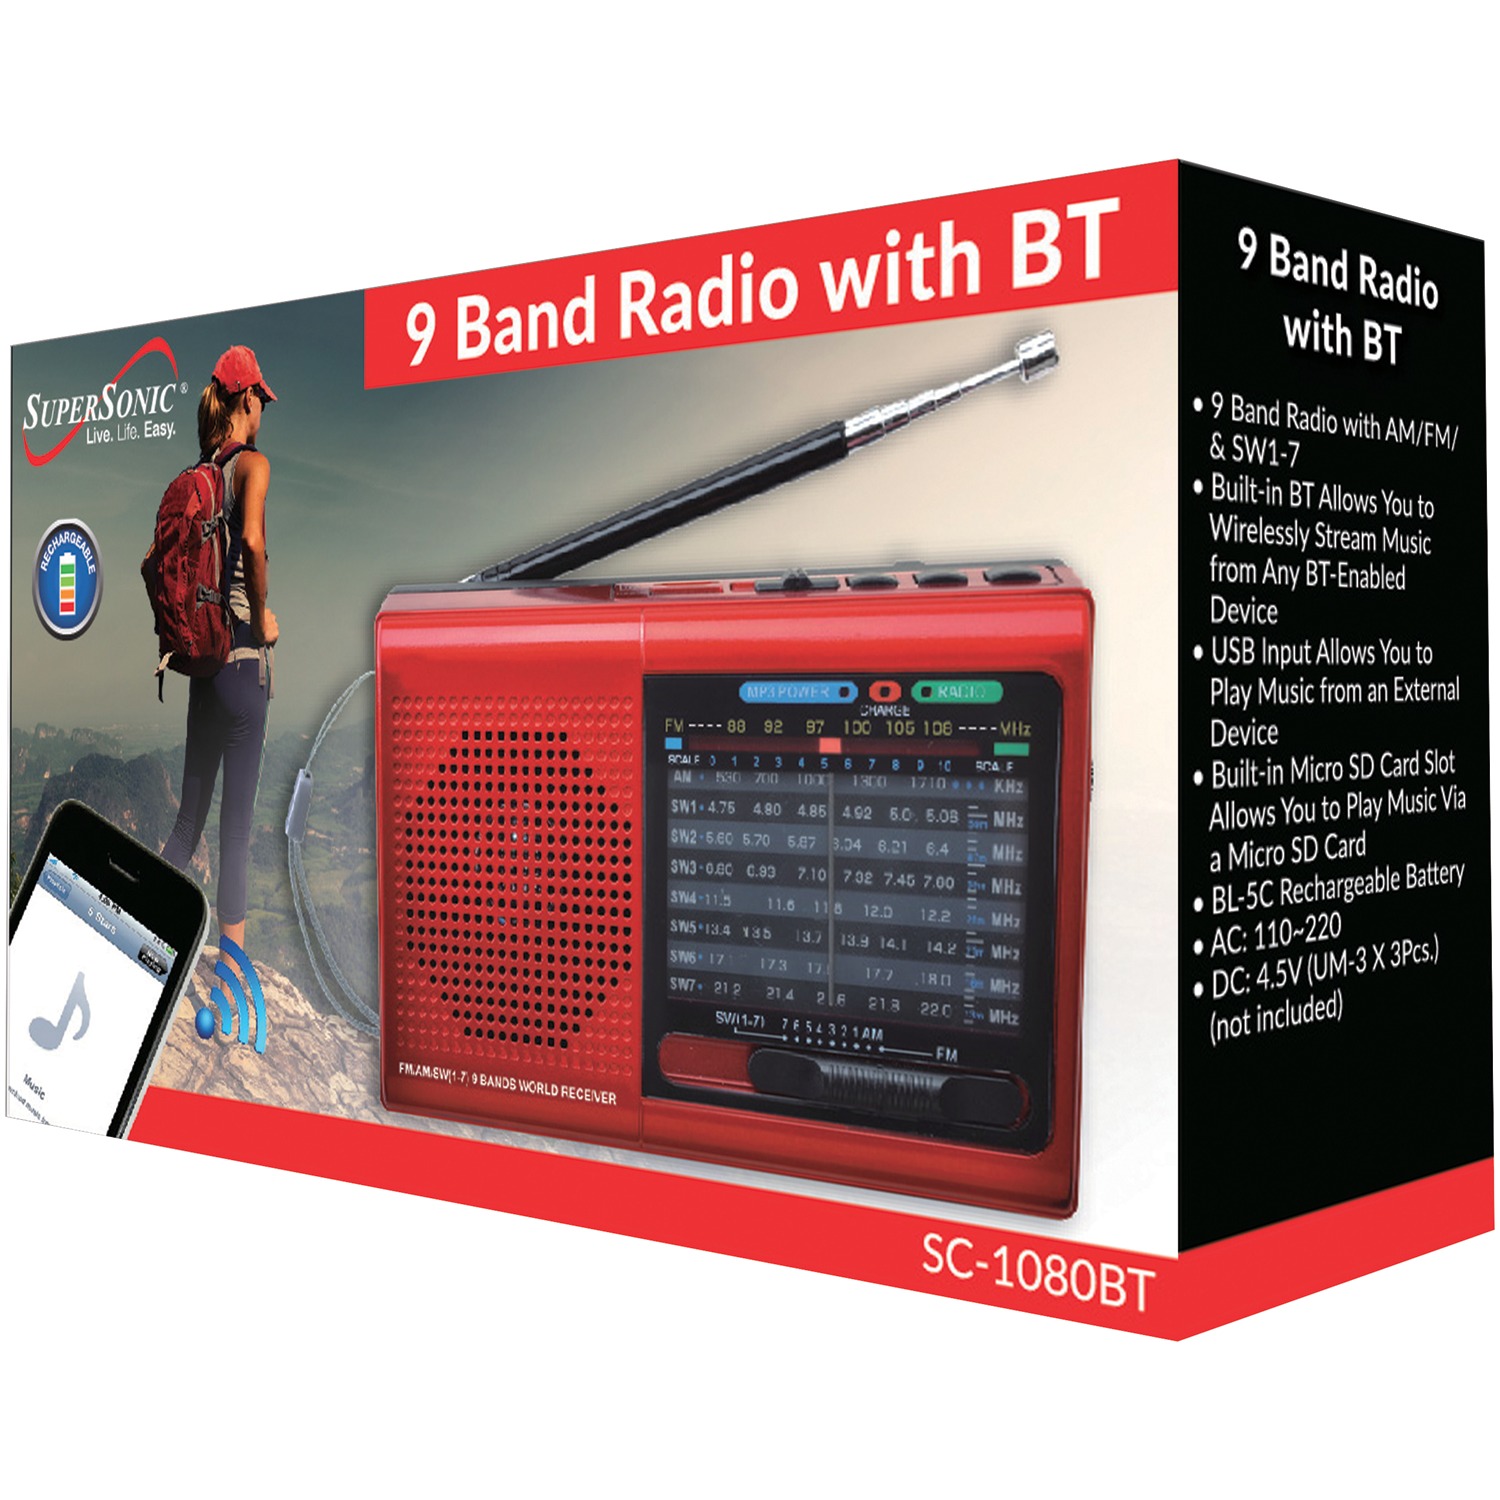 Supersonic Portable AM/FM Radio, Red, SC-1080BT-Red - image 3 of 3